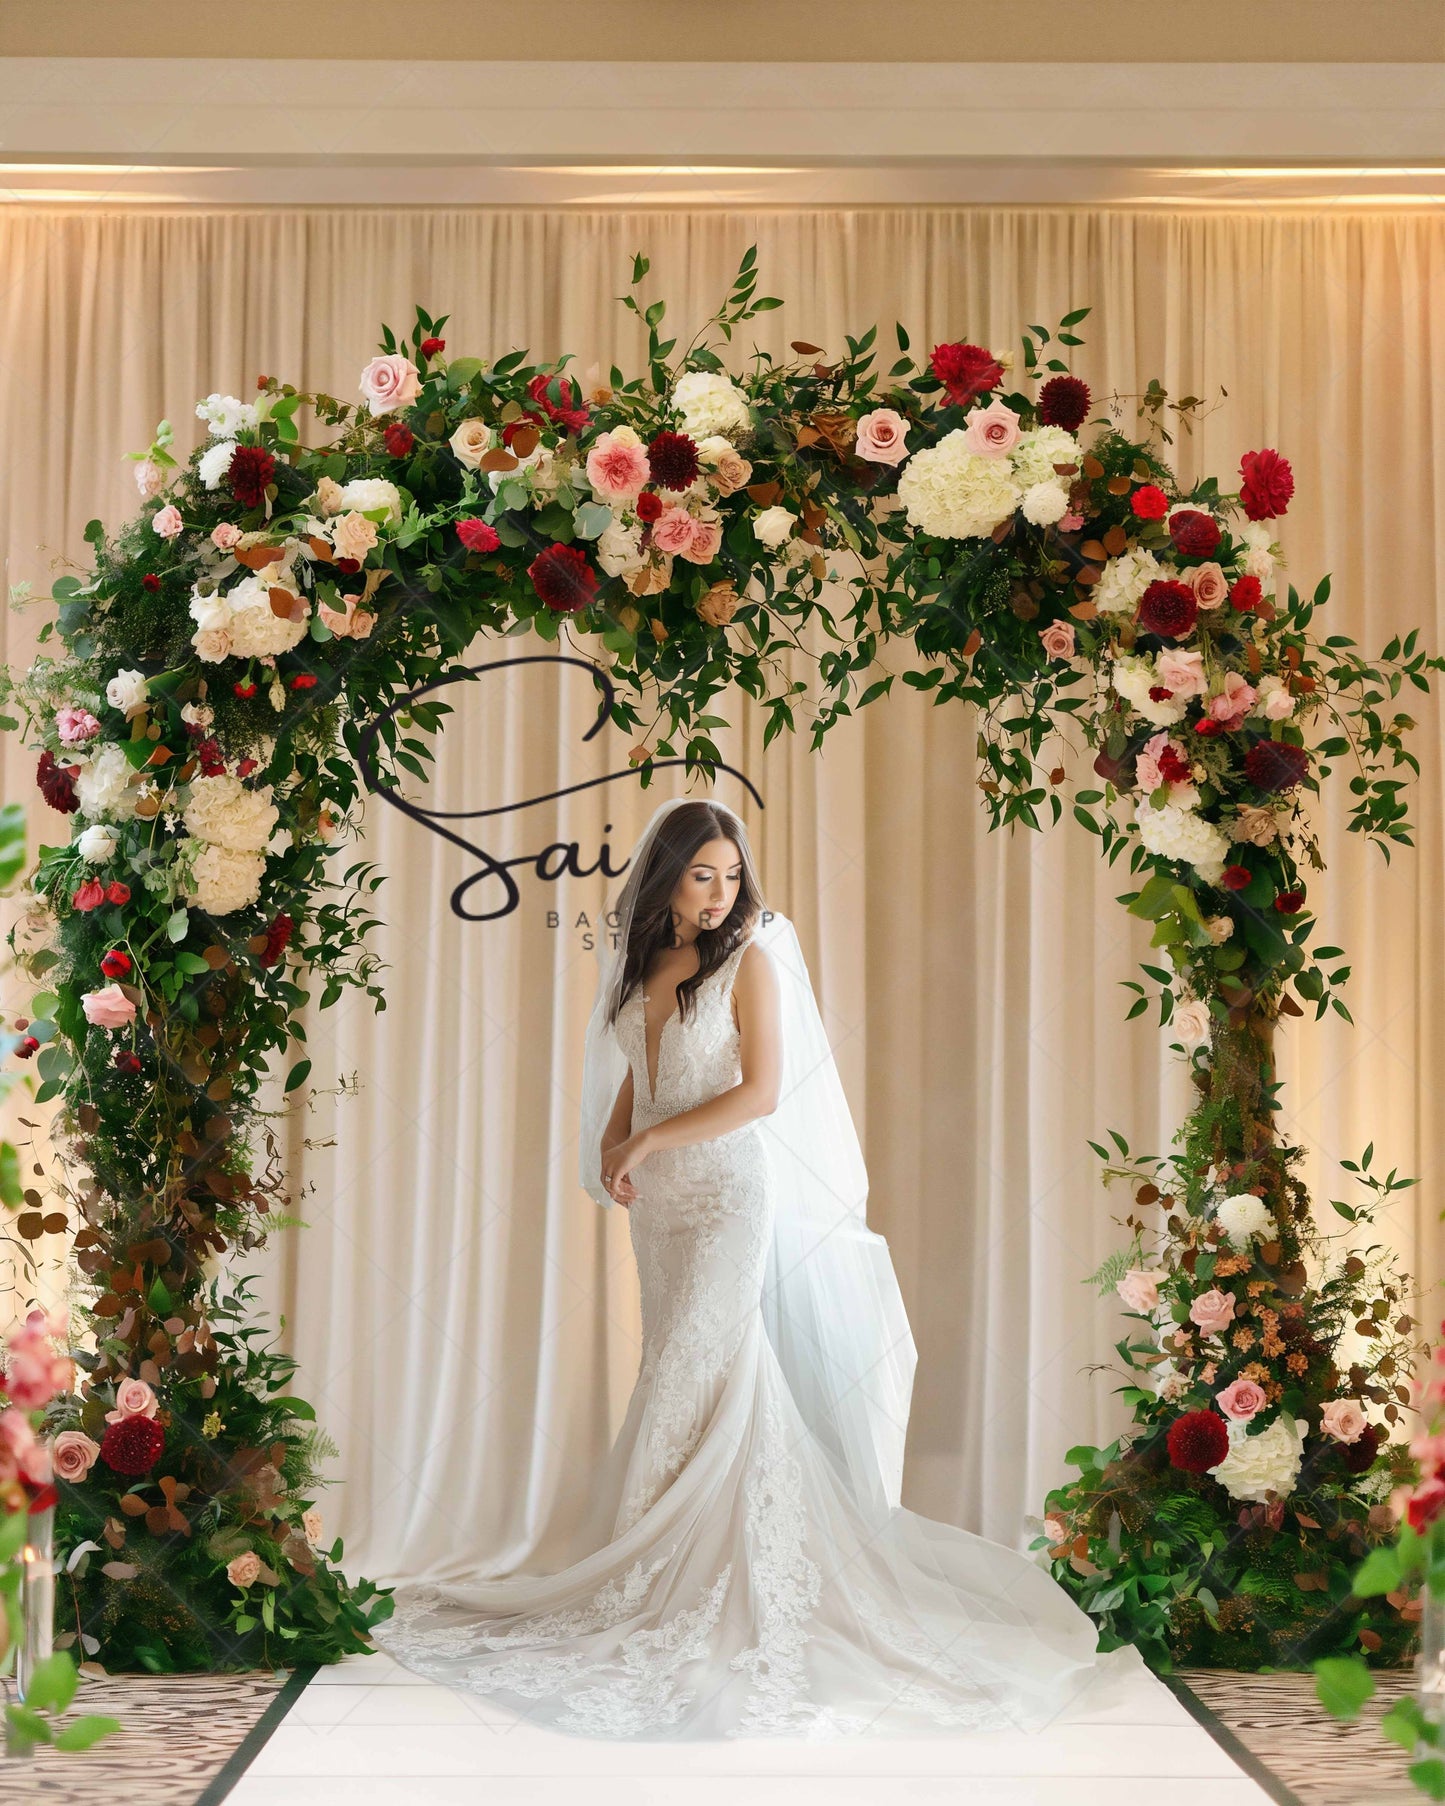 Floral Elegance Arch - Digital Backdrop - With Personal and Commercial License for Businesses